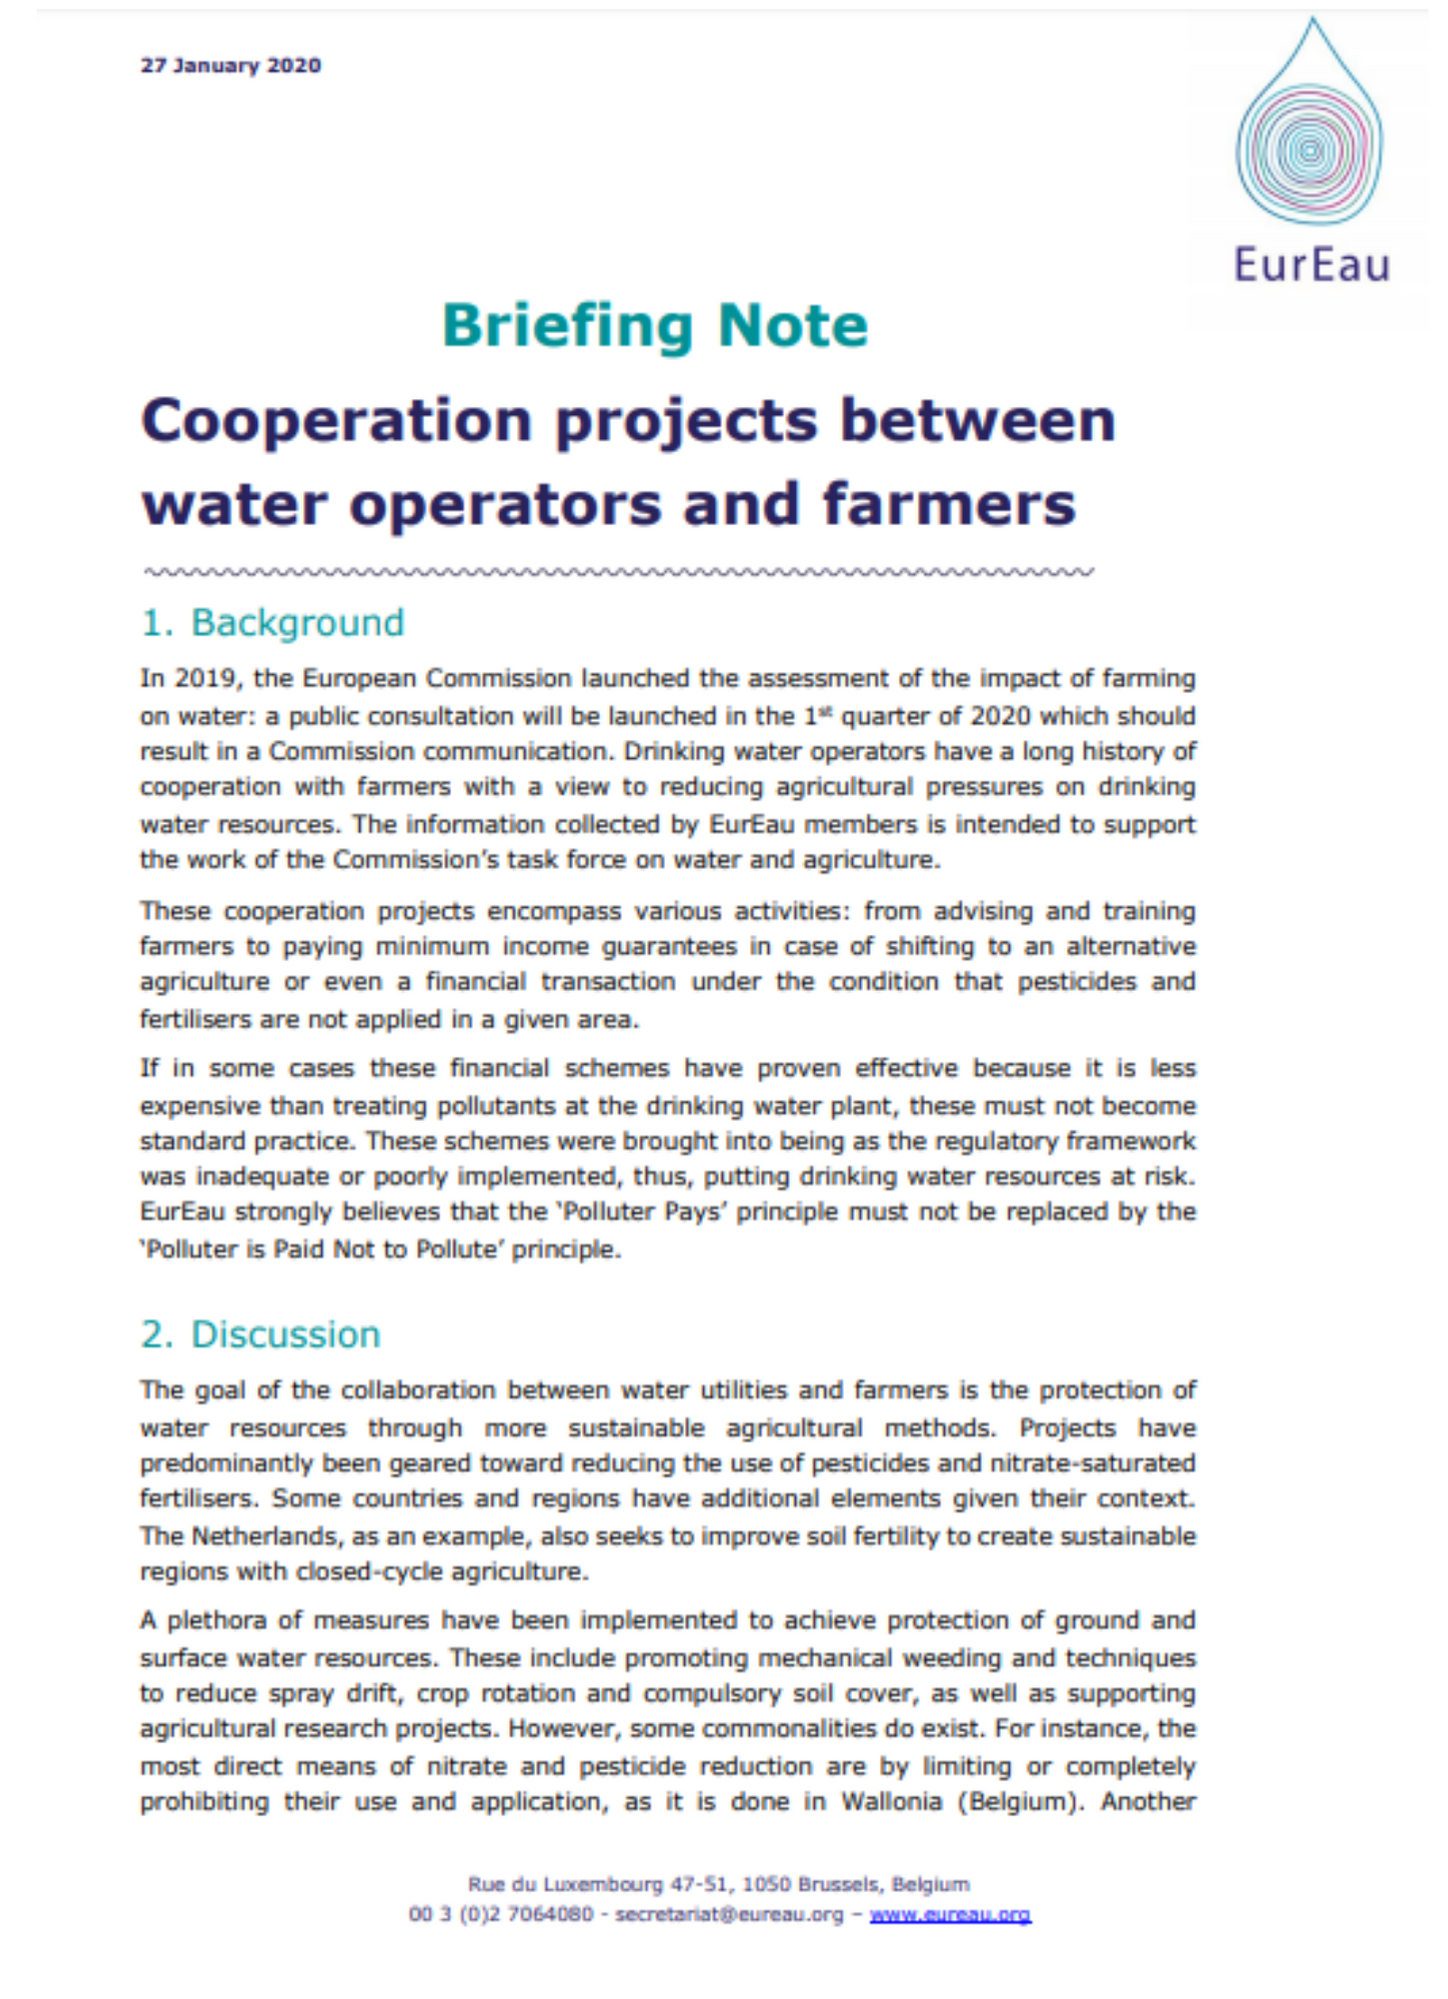 Briefing note on cooperation projects between water operators and farmers